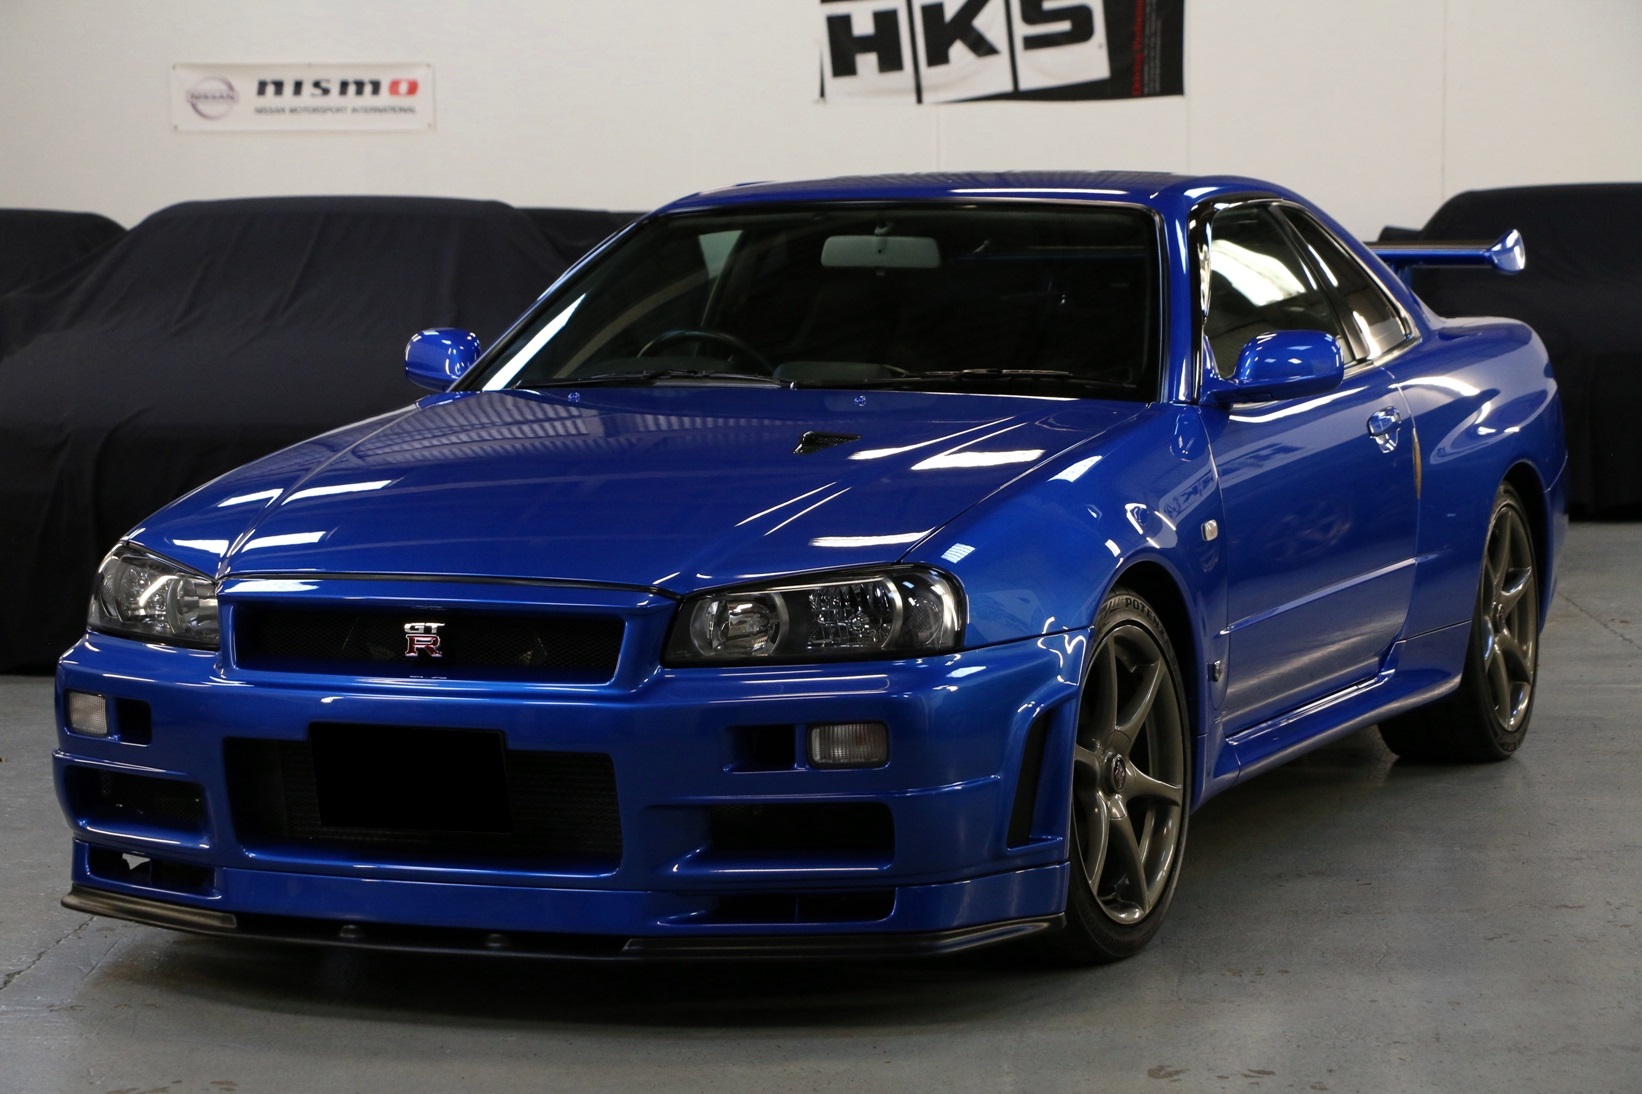 Buying a Nissan Skyline R34 GT-R - Ultimate Guide - Garage Dreams